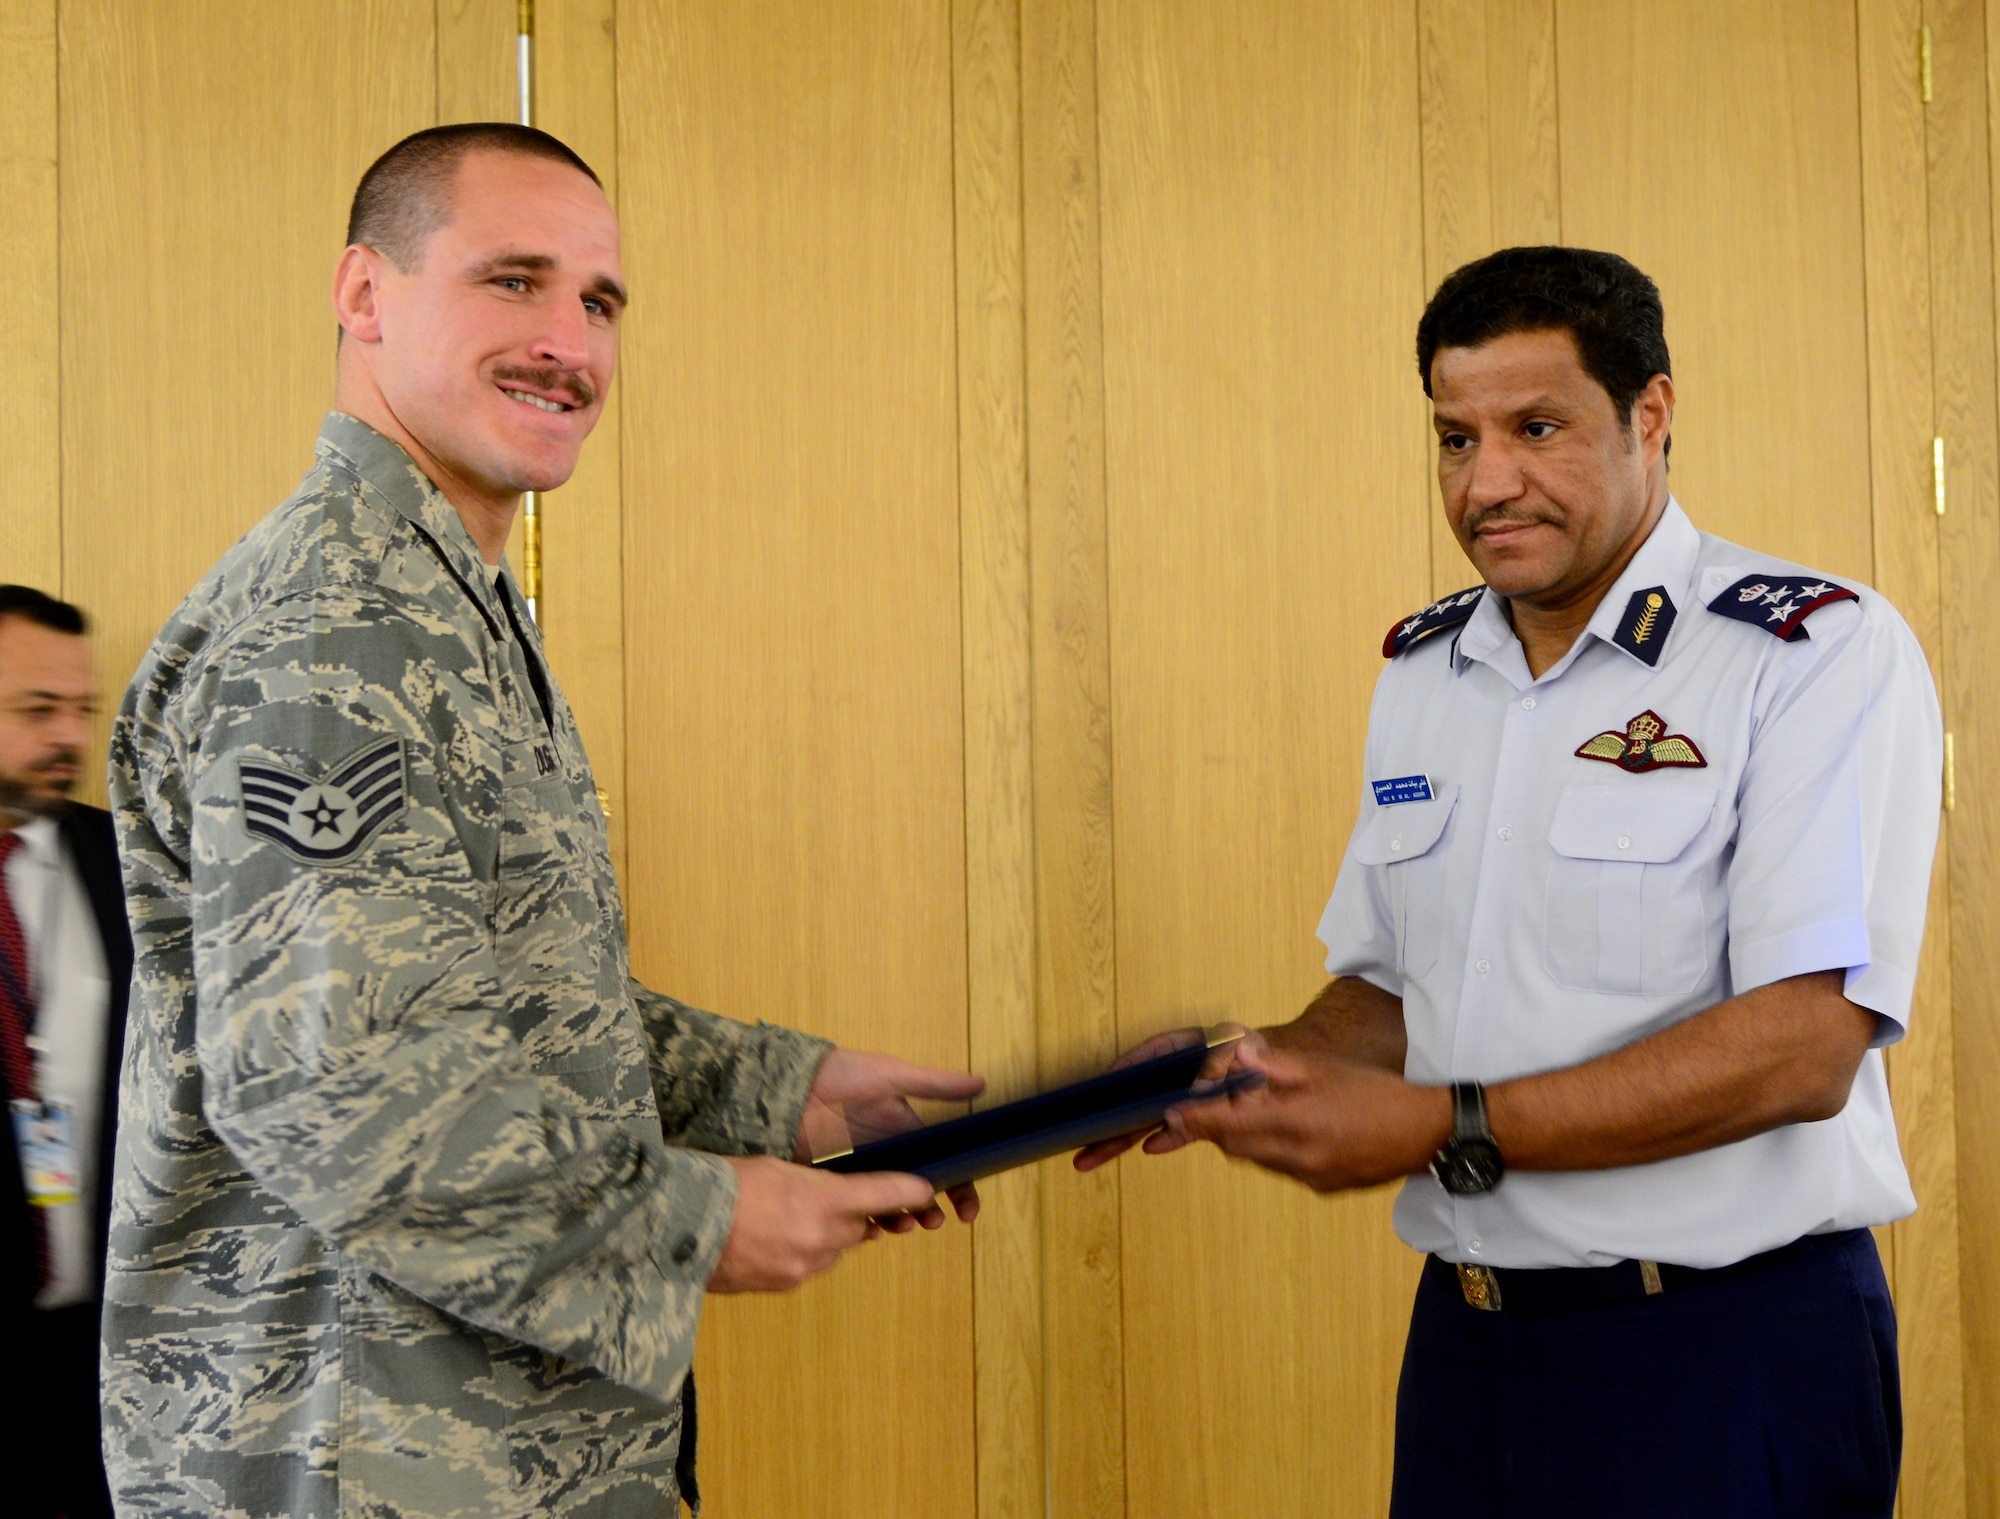 Brig. Gen. 'Ali Bayyat Al-'Asiri, Al Udeid Air Base commander/OC Transportation Wing, presents U.S. Air Force Staff Sgt. Matthew Duggan, 379th Expeditionary Civil Engineer Squadron firefighter, with a certificate during the Qatar Emiri Air Force’s Air Lift Wing’s C-17 Globemaster III 5th year anniversary ceremony Nov. 7, 2014, at Al Udeid Air Base, Qatar. The firefighters were presented with certificates of appreciation for their help in putting out a C-17 fire Sept. 6, here. Eighteen fire rescue personnel were on the scene and involved in the mitigation efforts. (U.S. Air Force photo by Senior Airman Kia Atkins)